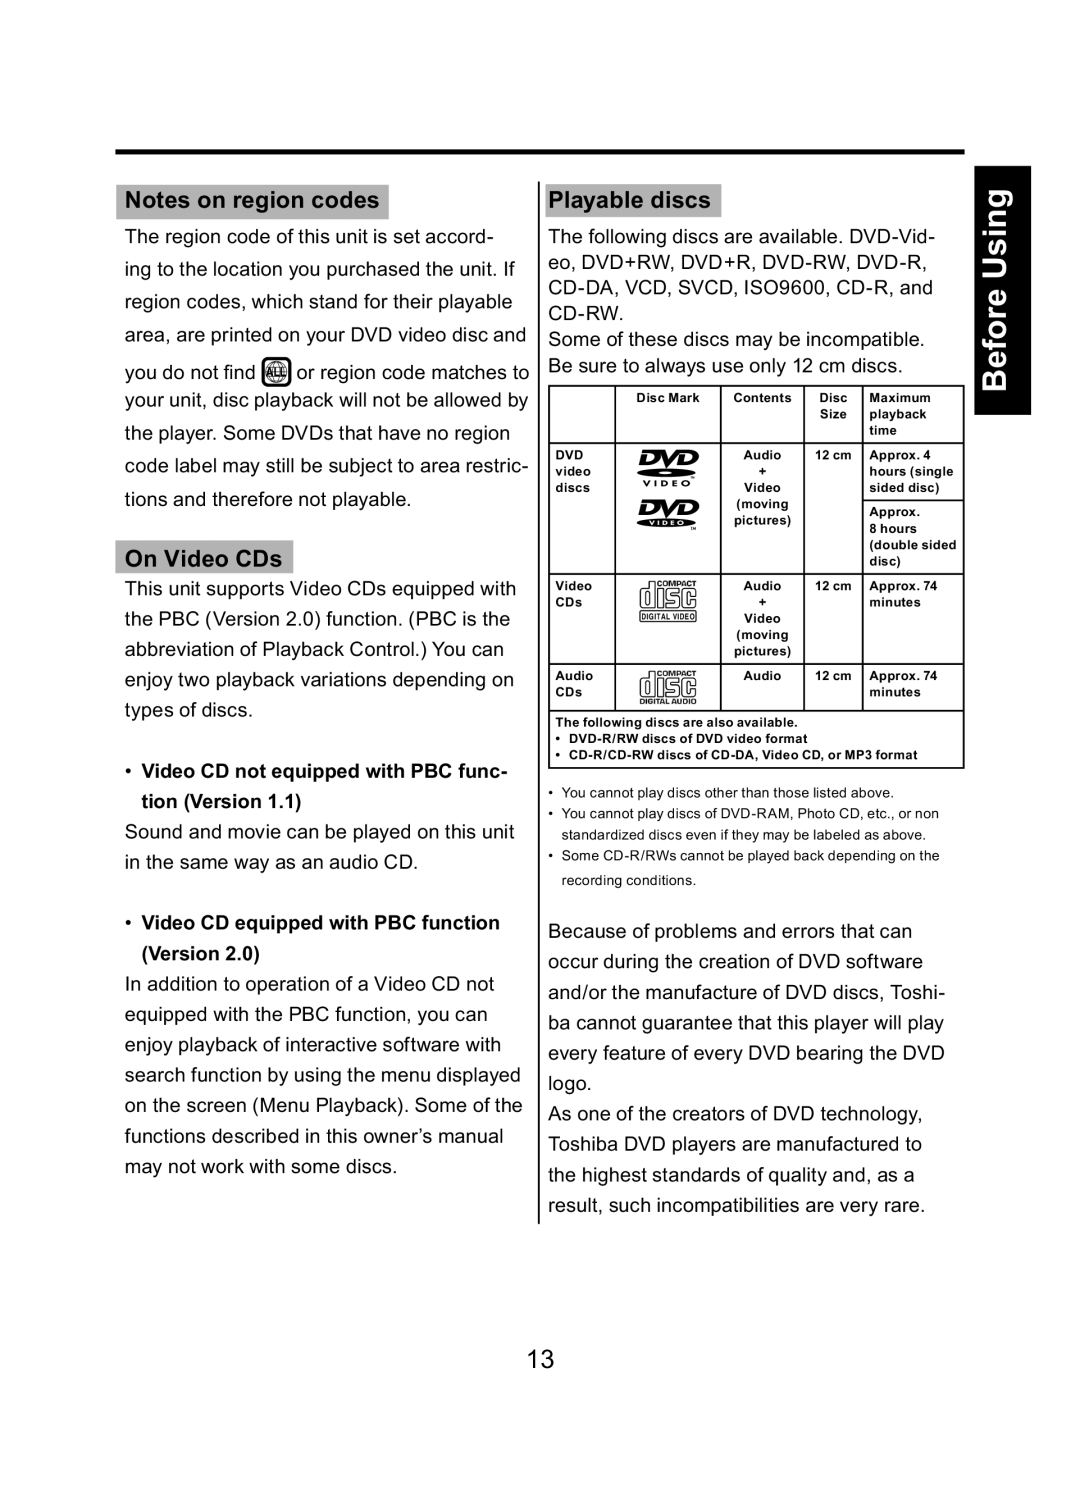 Toshiba TDP-ET10 owner manual Notes on region codes, On Video CDs, Playable discs, Before Using 